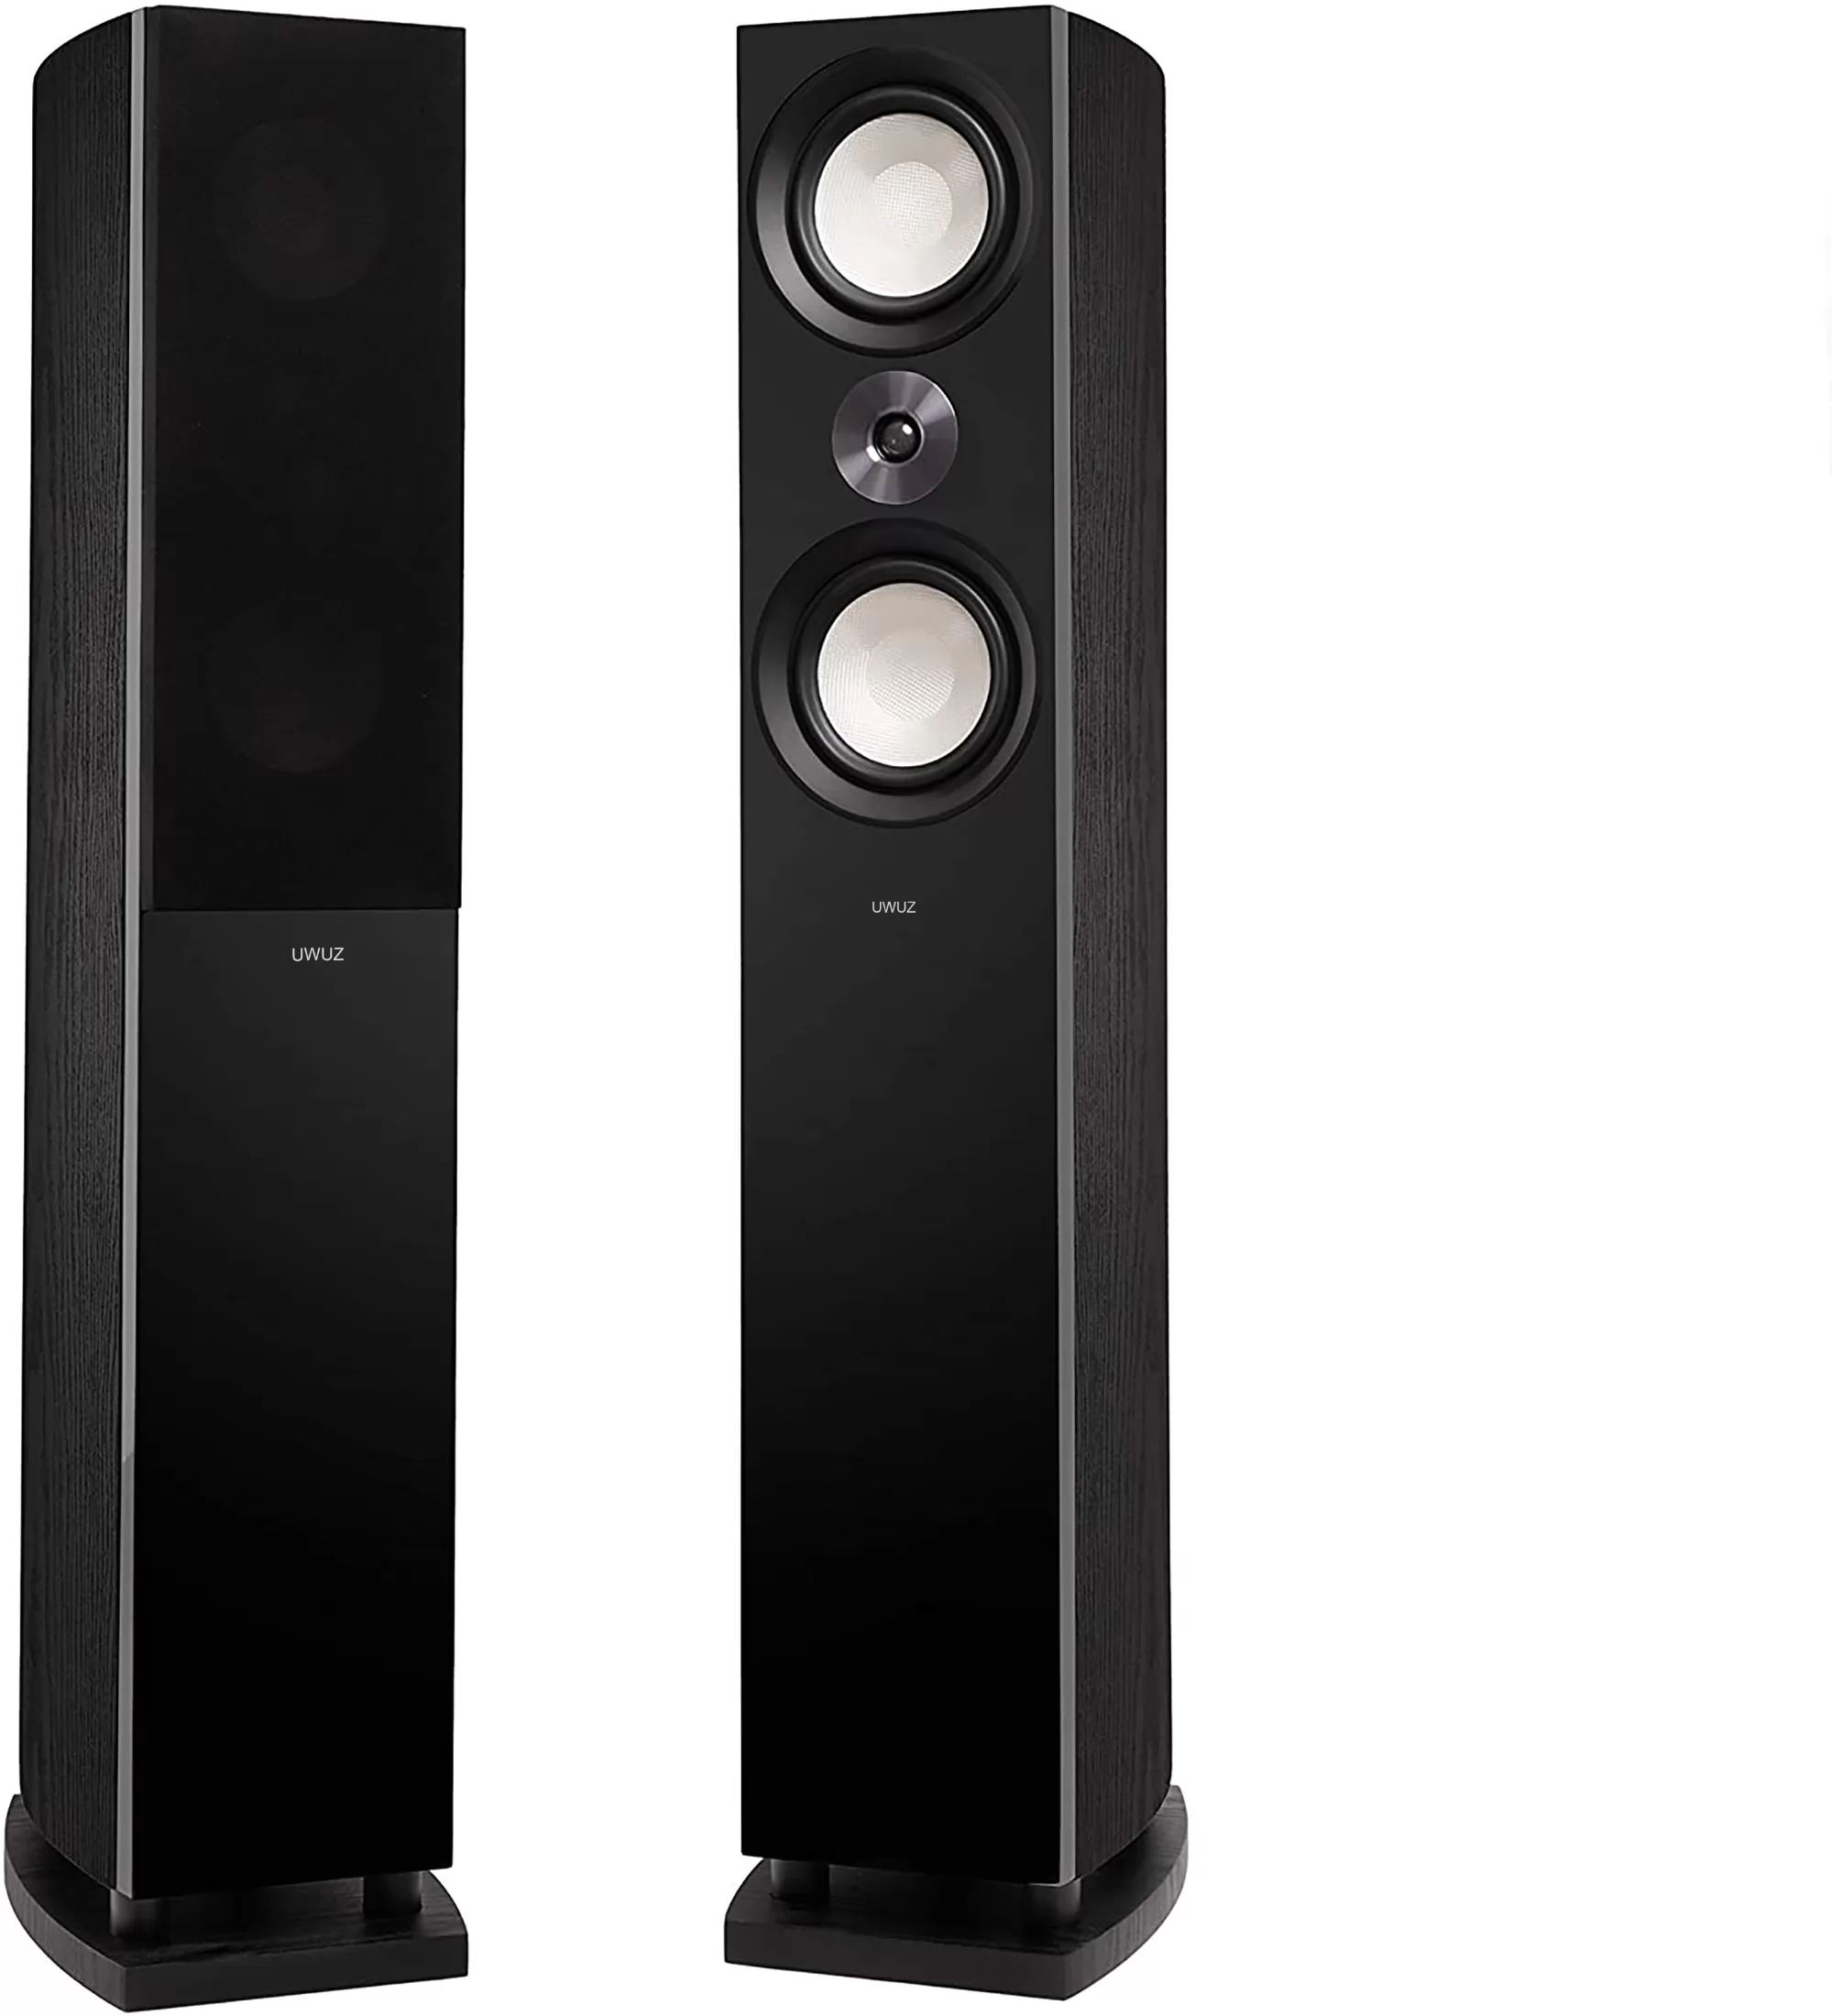 UWUZ Reference High Performance 3-Way Floorstanding Loudspeakers with Down-Firing 8" Subwoofers for 2-Channel Stereo Listening or Home Theater System